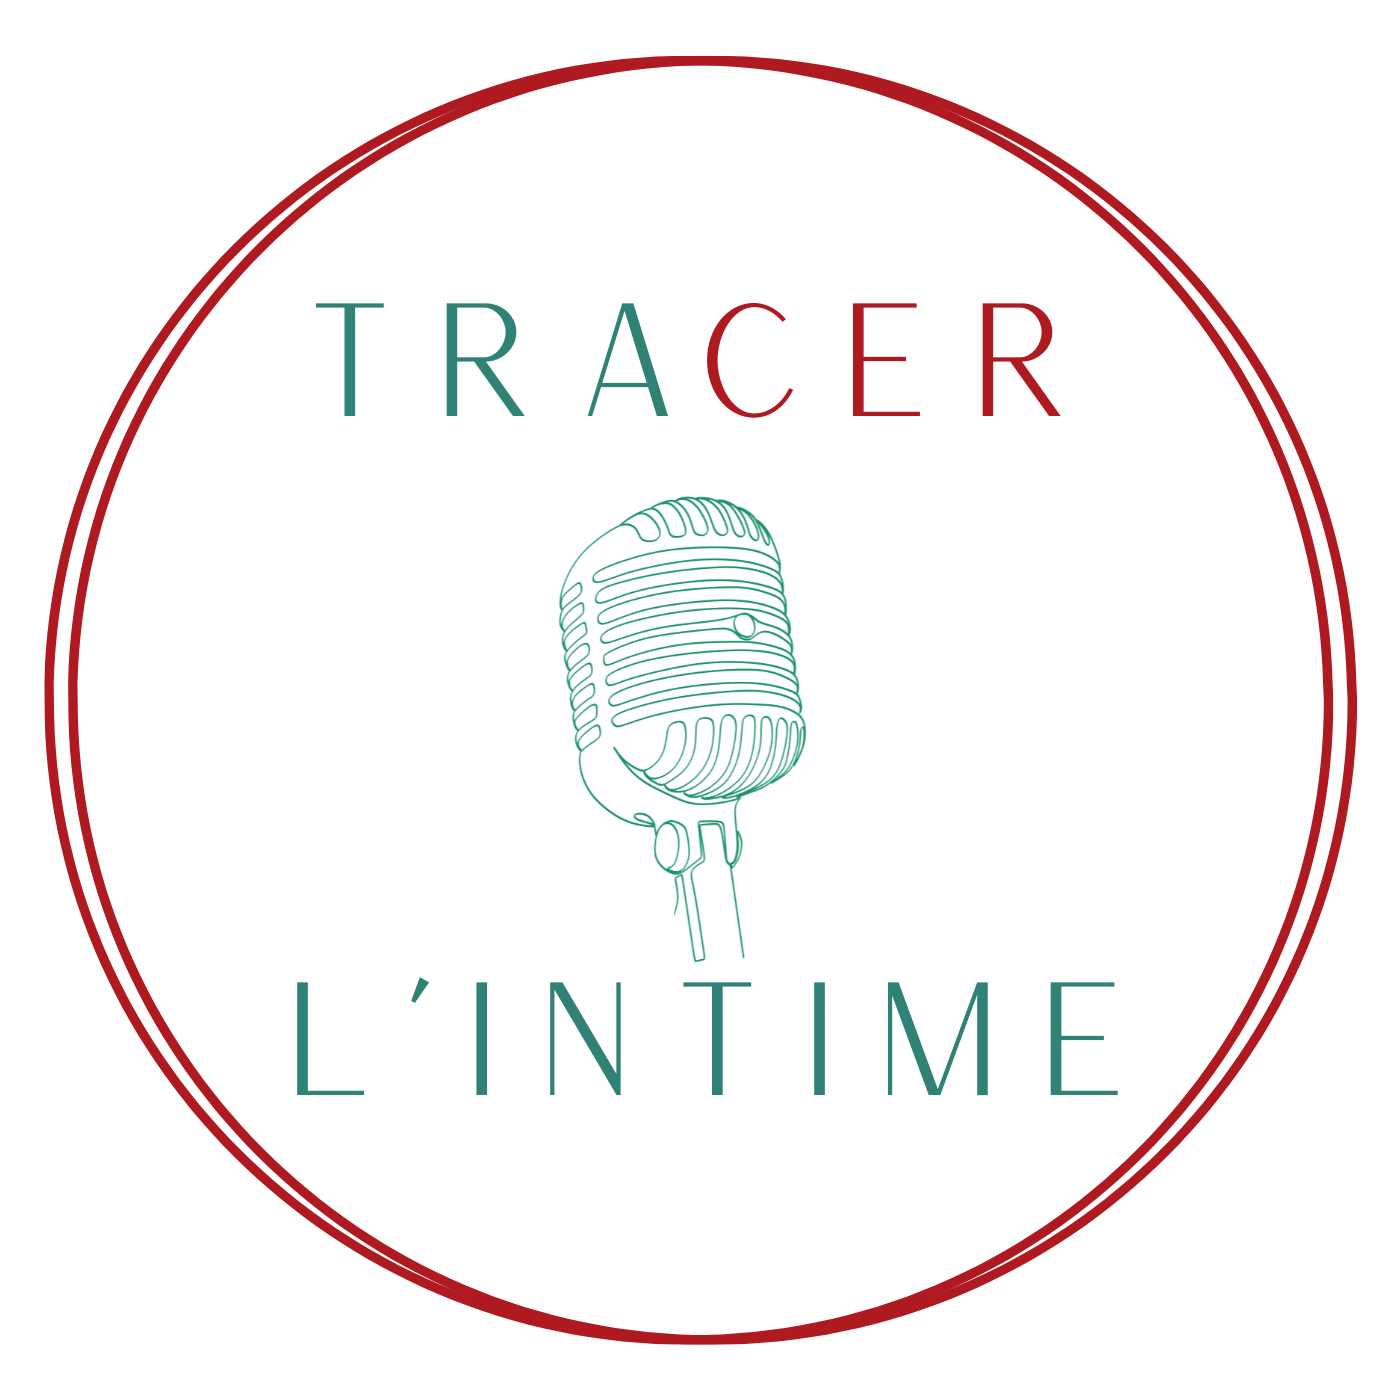 Tracer lintime 1400 x 1400 px